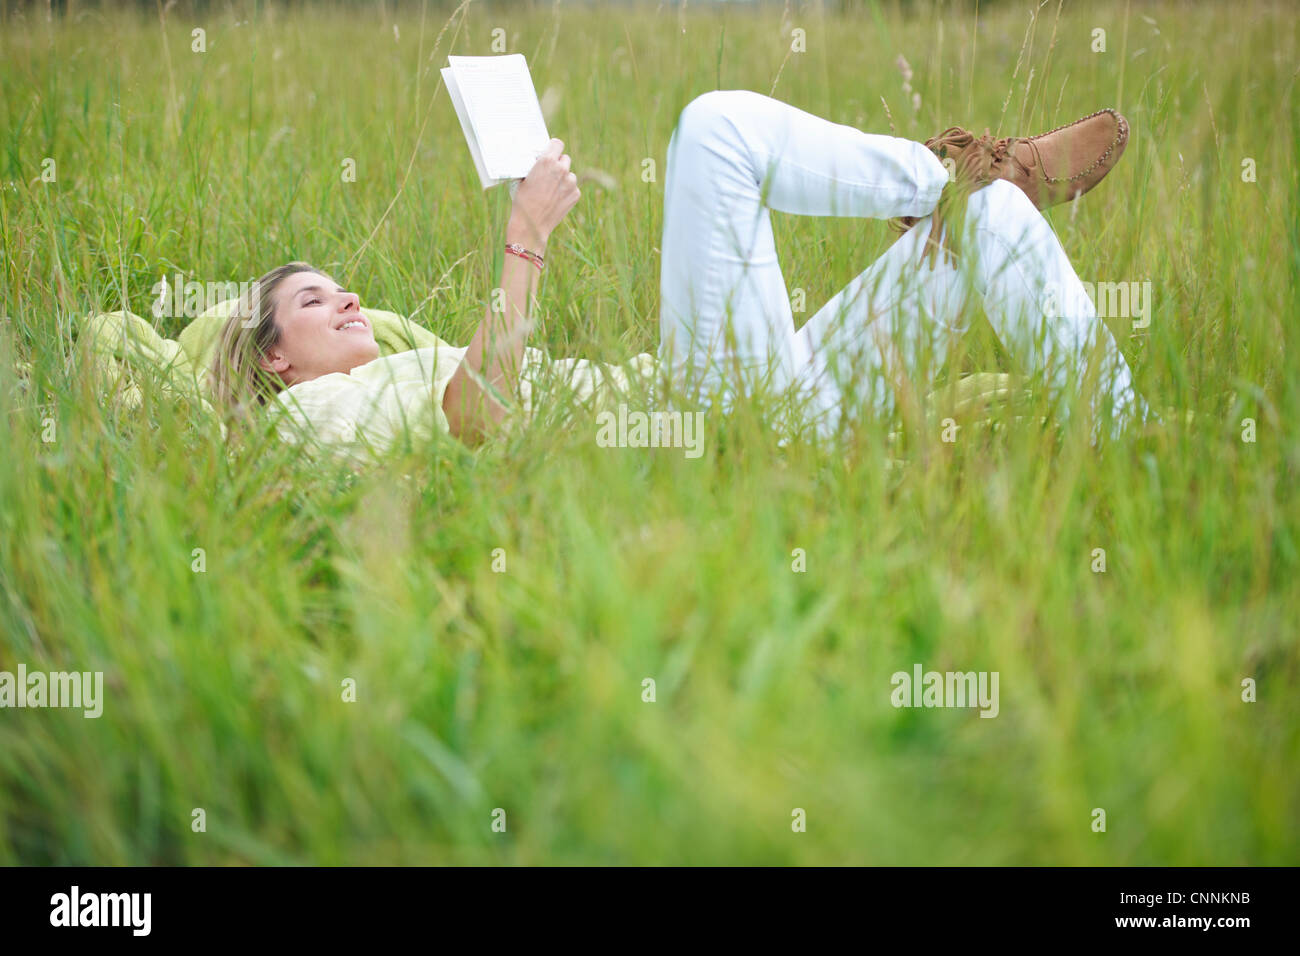 Woman Reading in tall grass Banque D'Images